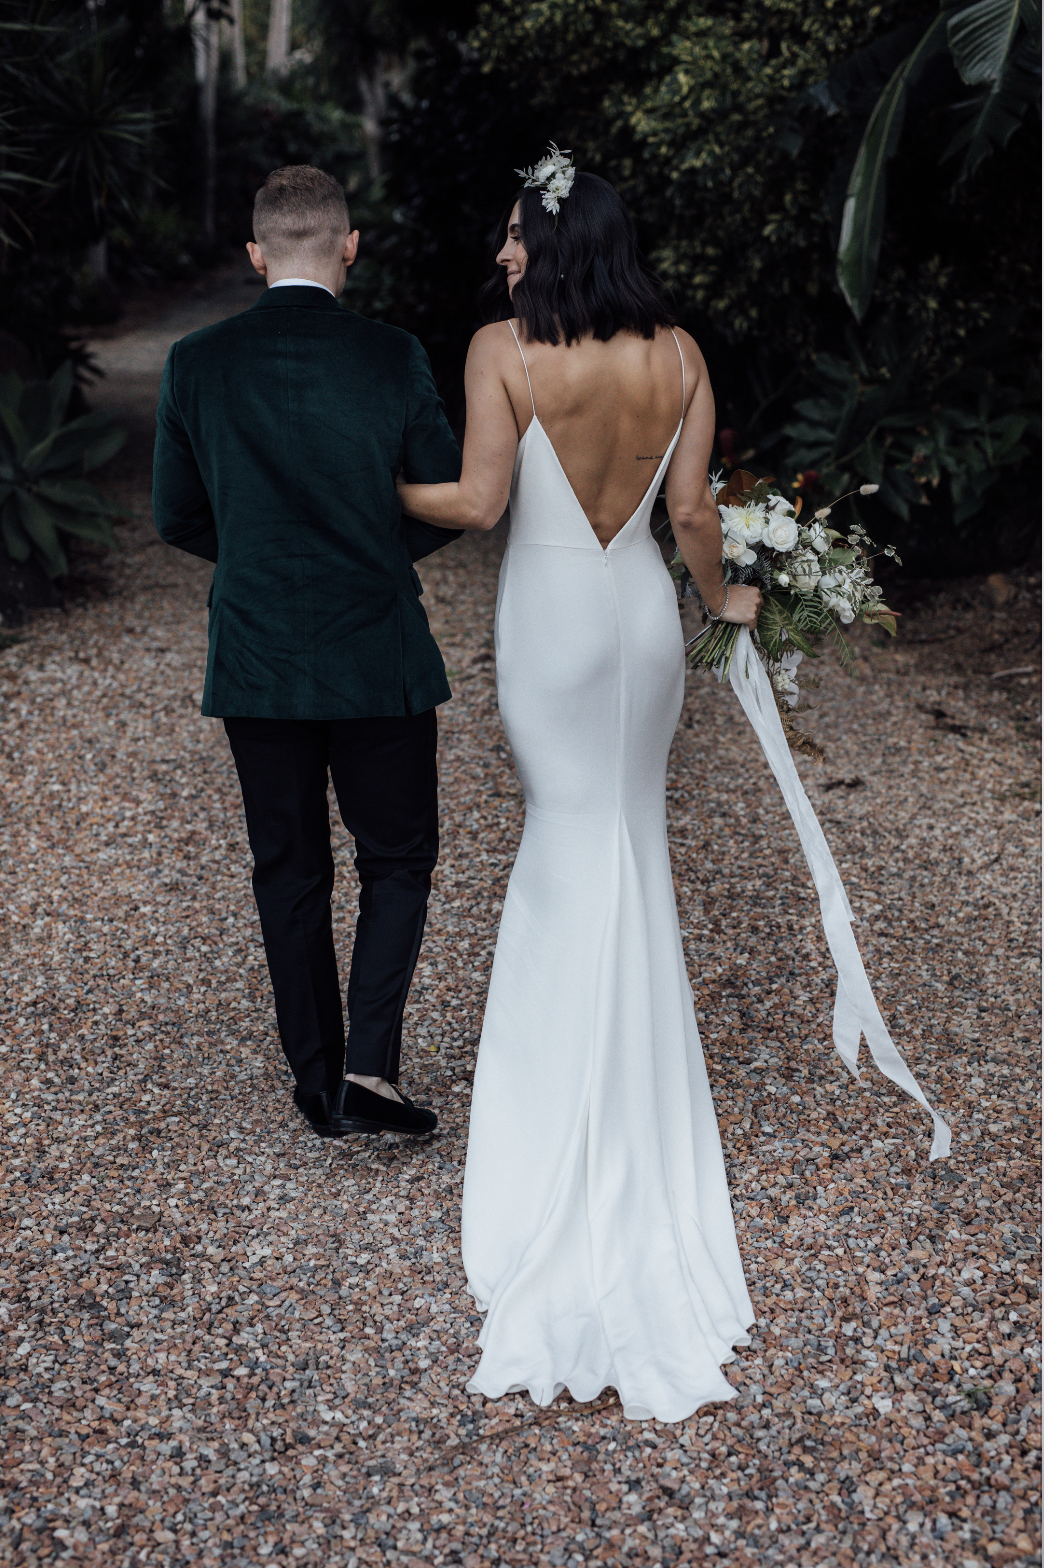 Looking for a simple white wedding dress? Read these tips for choosing the  perfect gown!